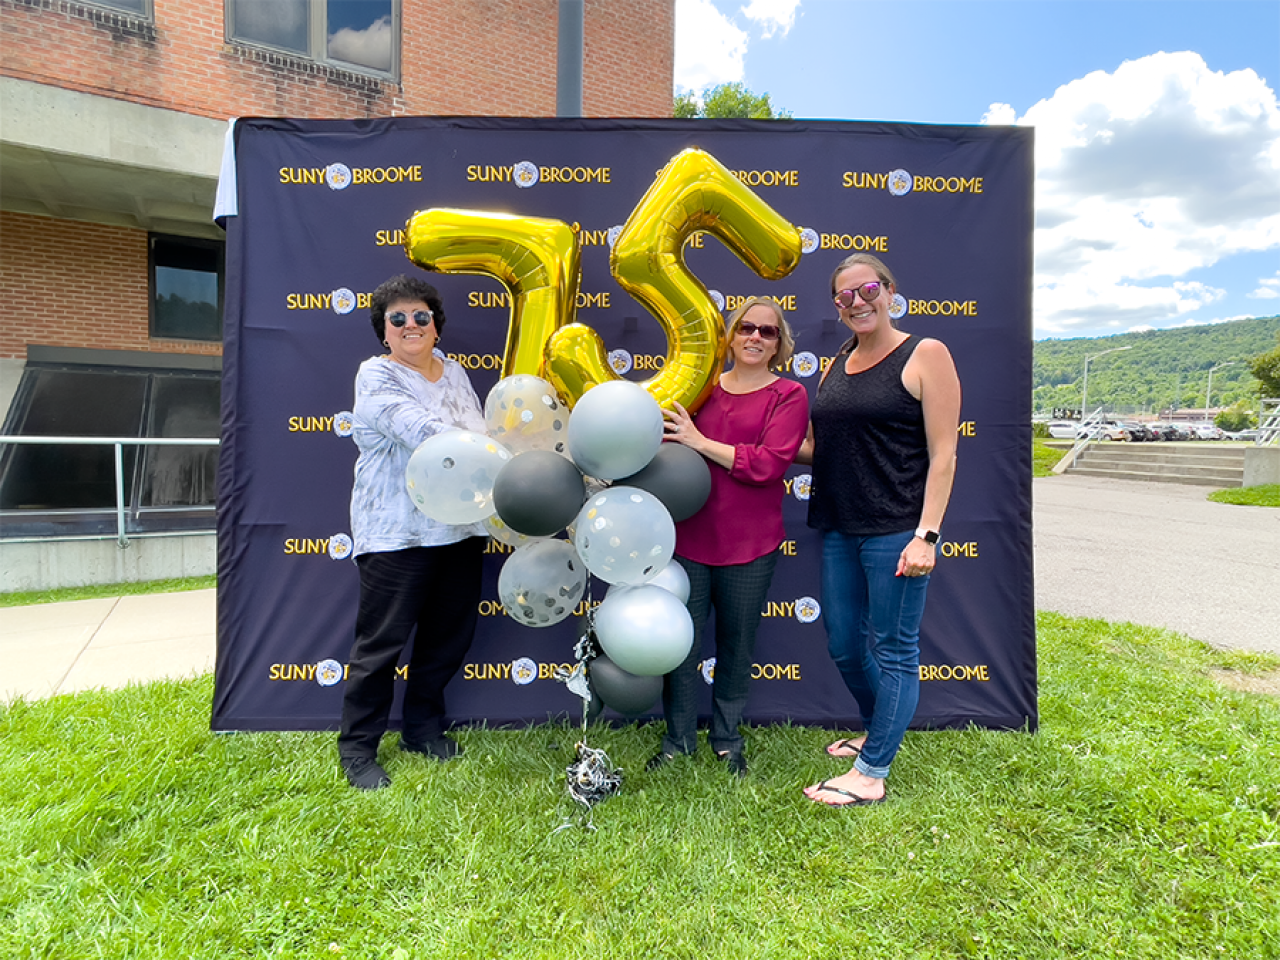 Kicking off a Year of Festivities With SUNY Broome’s Employee Summer Celebration